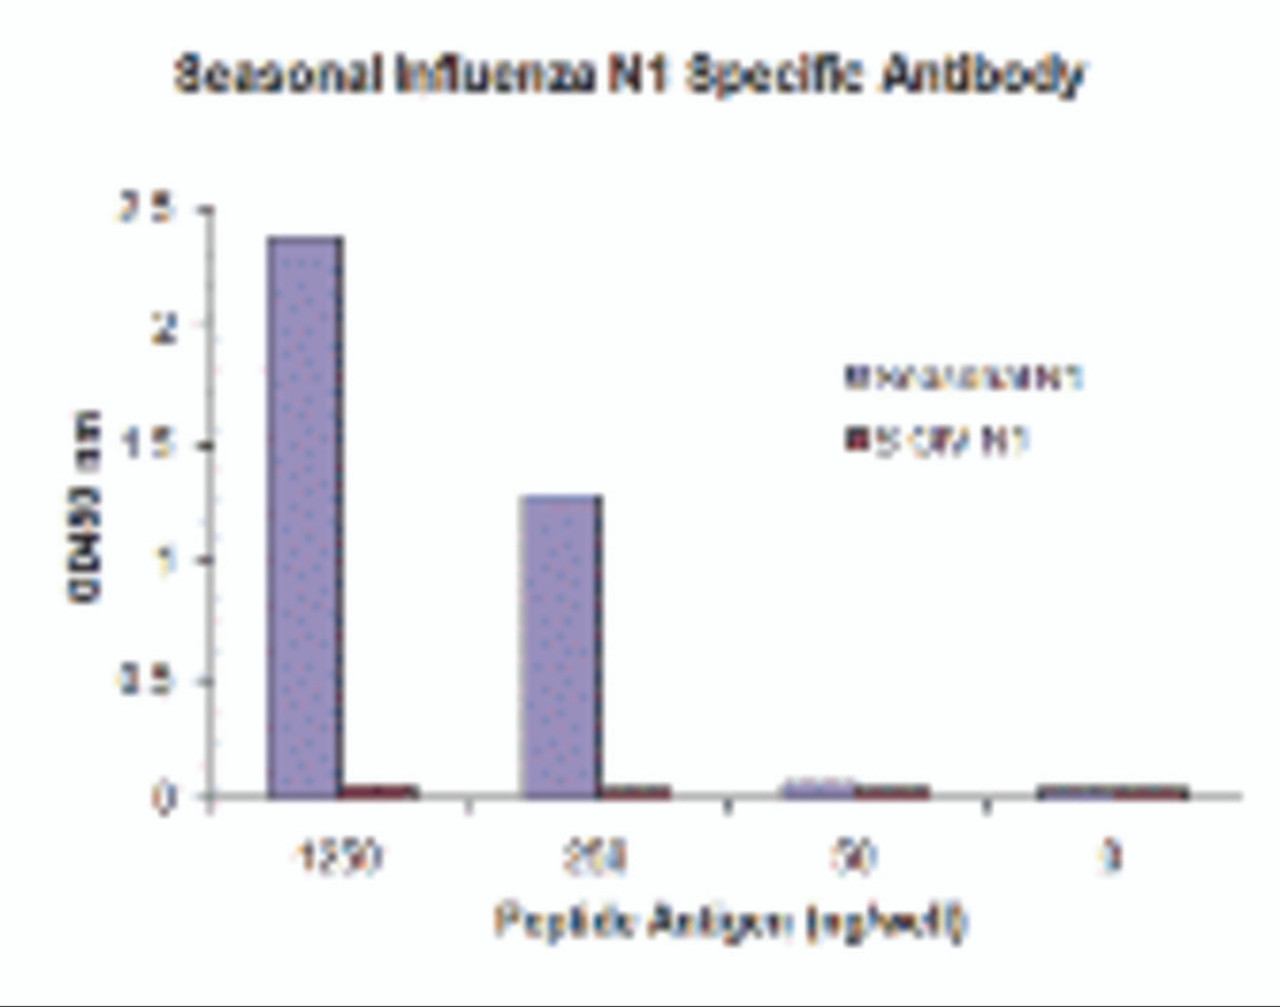 Seasonal influenza A N1 antibody (Cat. No. PM-5921) specifically recognizes seasonal (H1N1) N1, and does not cross-react with peptide corresponding to swine-origin influenza A (S-OIV, H1N1) N1 peptide, in ELISA.